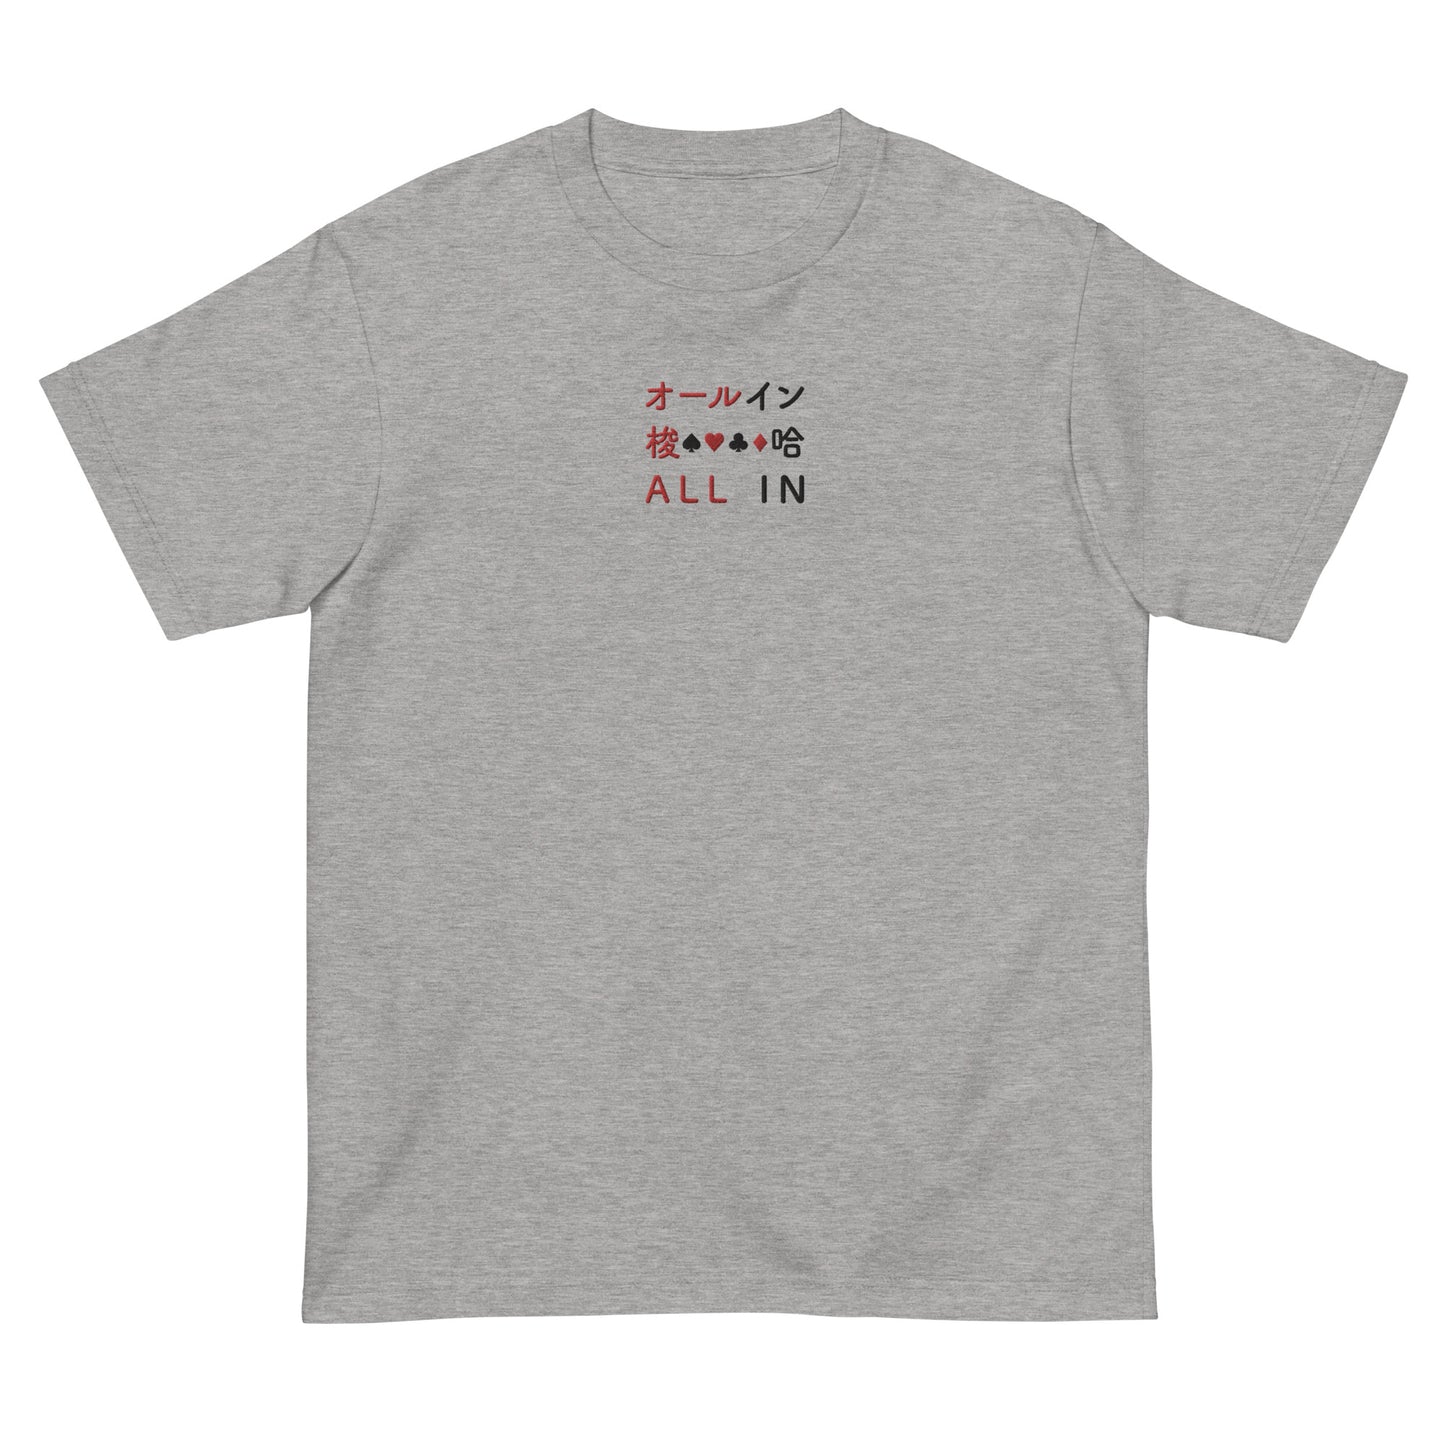 Light Gray High Quality Tee - Front Design with an Red, Black Embroidery "All IN" in Japanese,Chinese and English